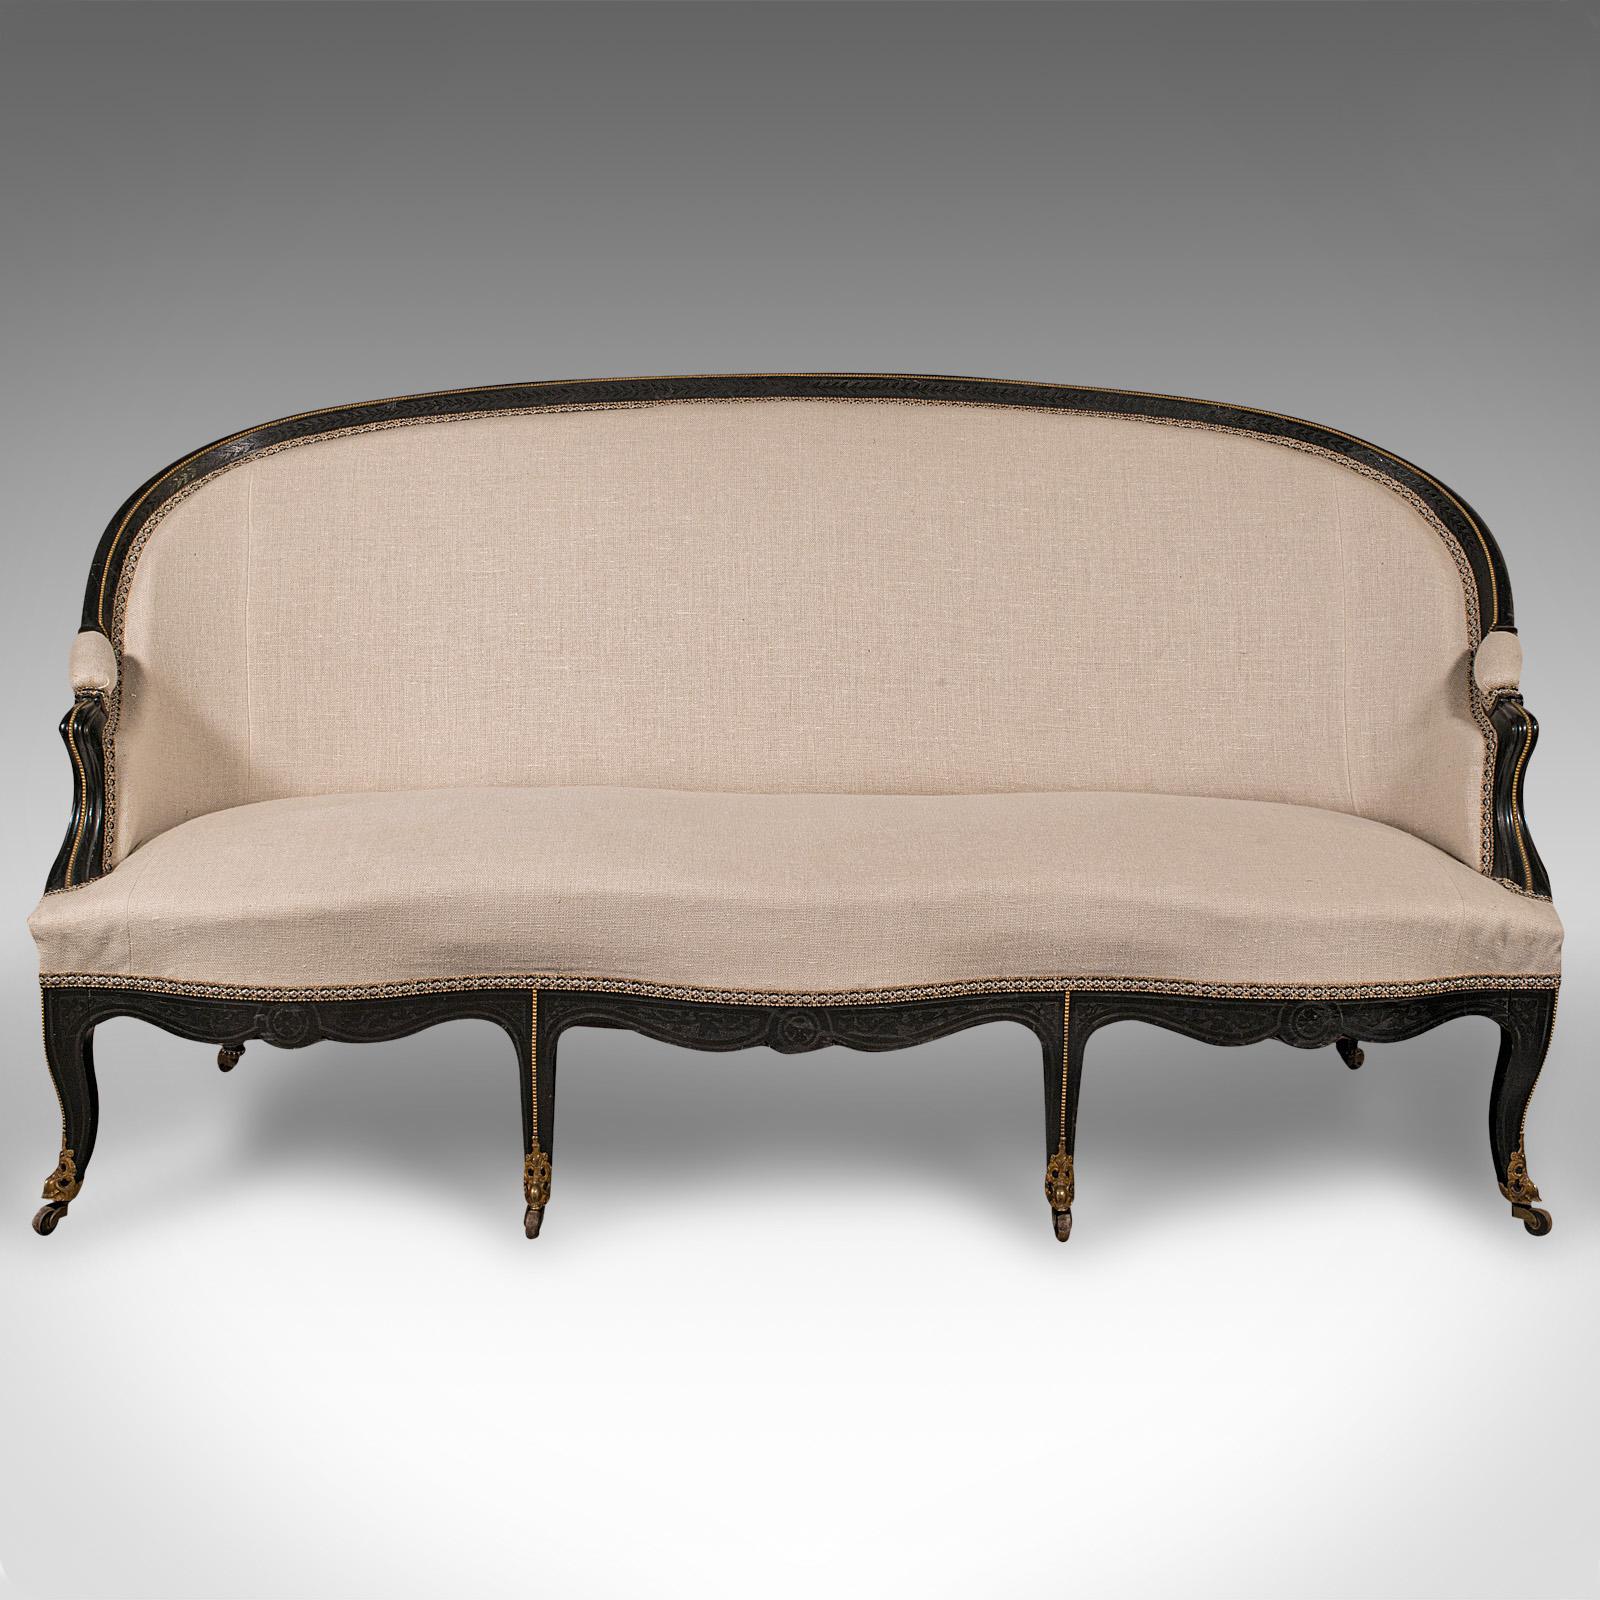 This is an antique canapé sofa. A Continental, ebonised wing settee in Louis XV revival taste, dating to the mid Victorian period, circa 1870.

Exudes quality and the quintessential revival taste of Louis Xv craftsmanship
Displays a desirable